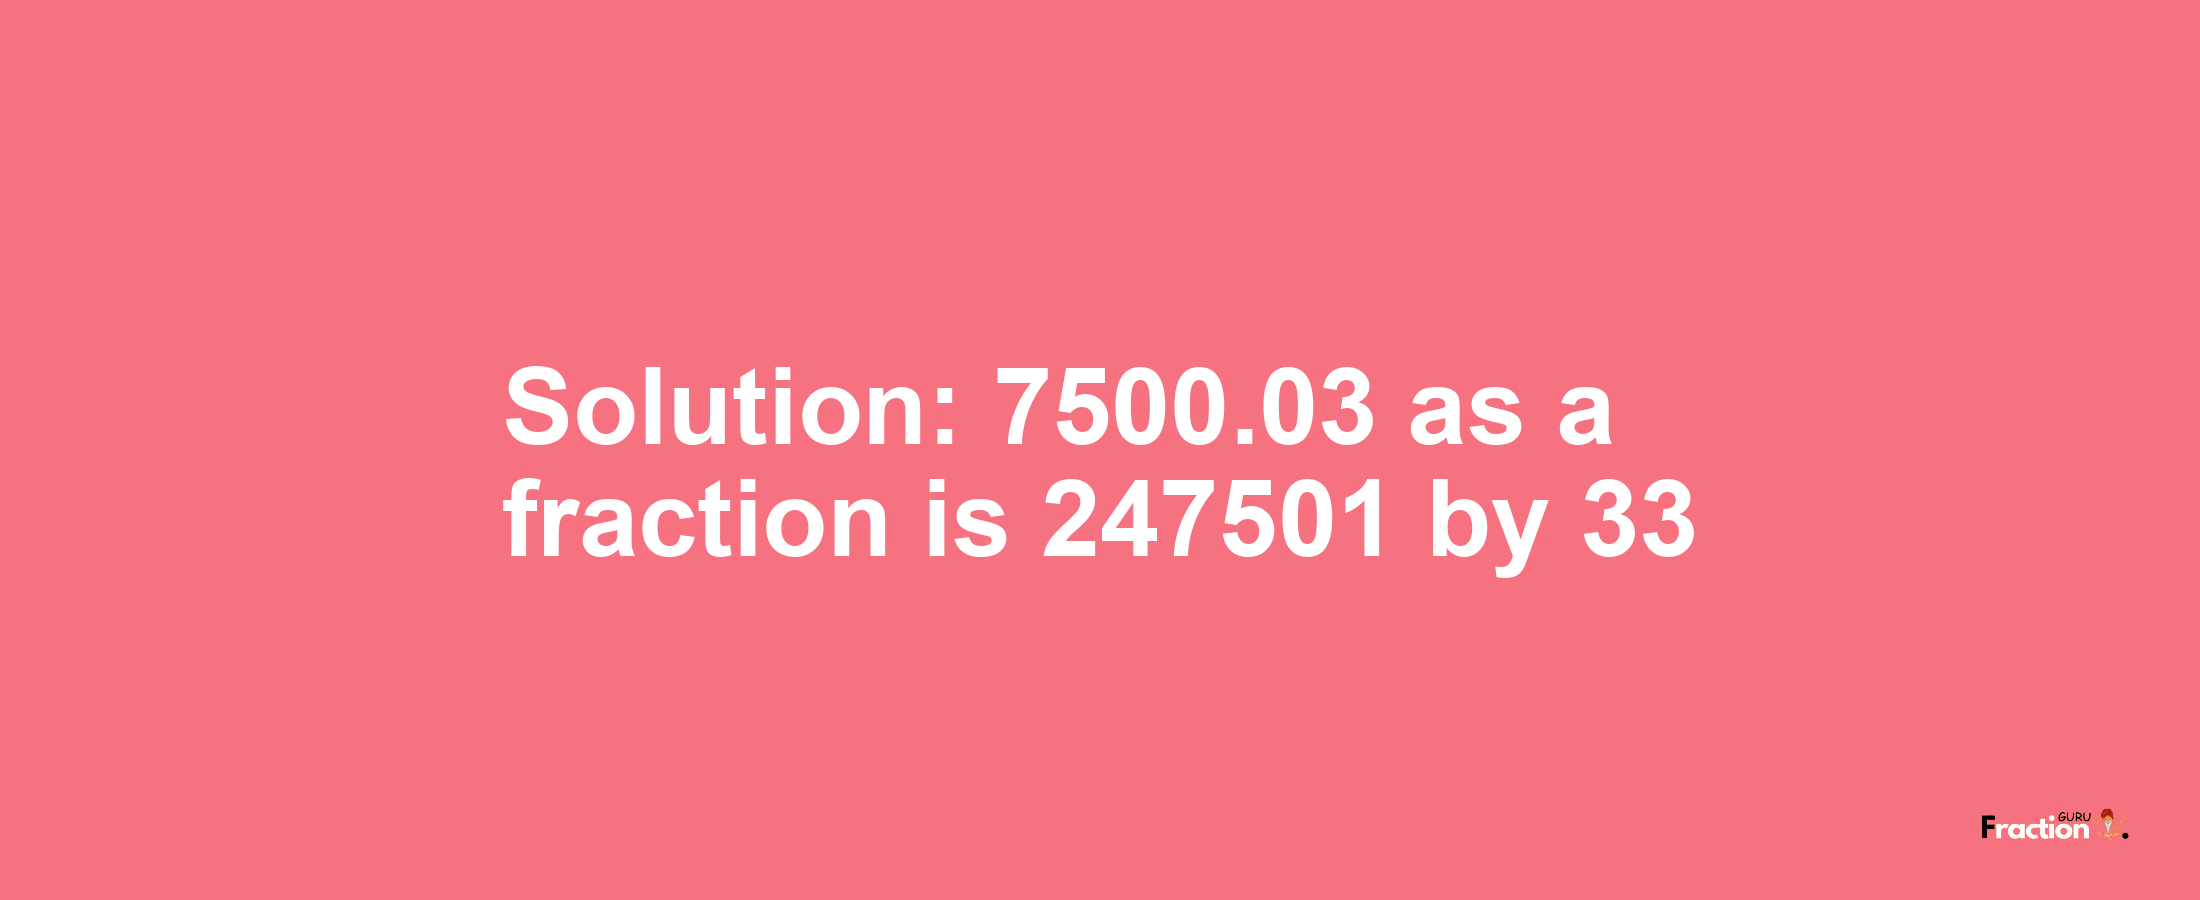 Solution:7500.03 as a fraction is 247501/33